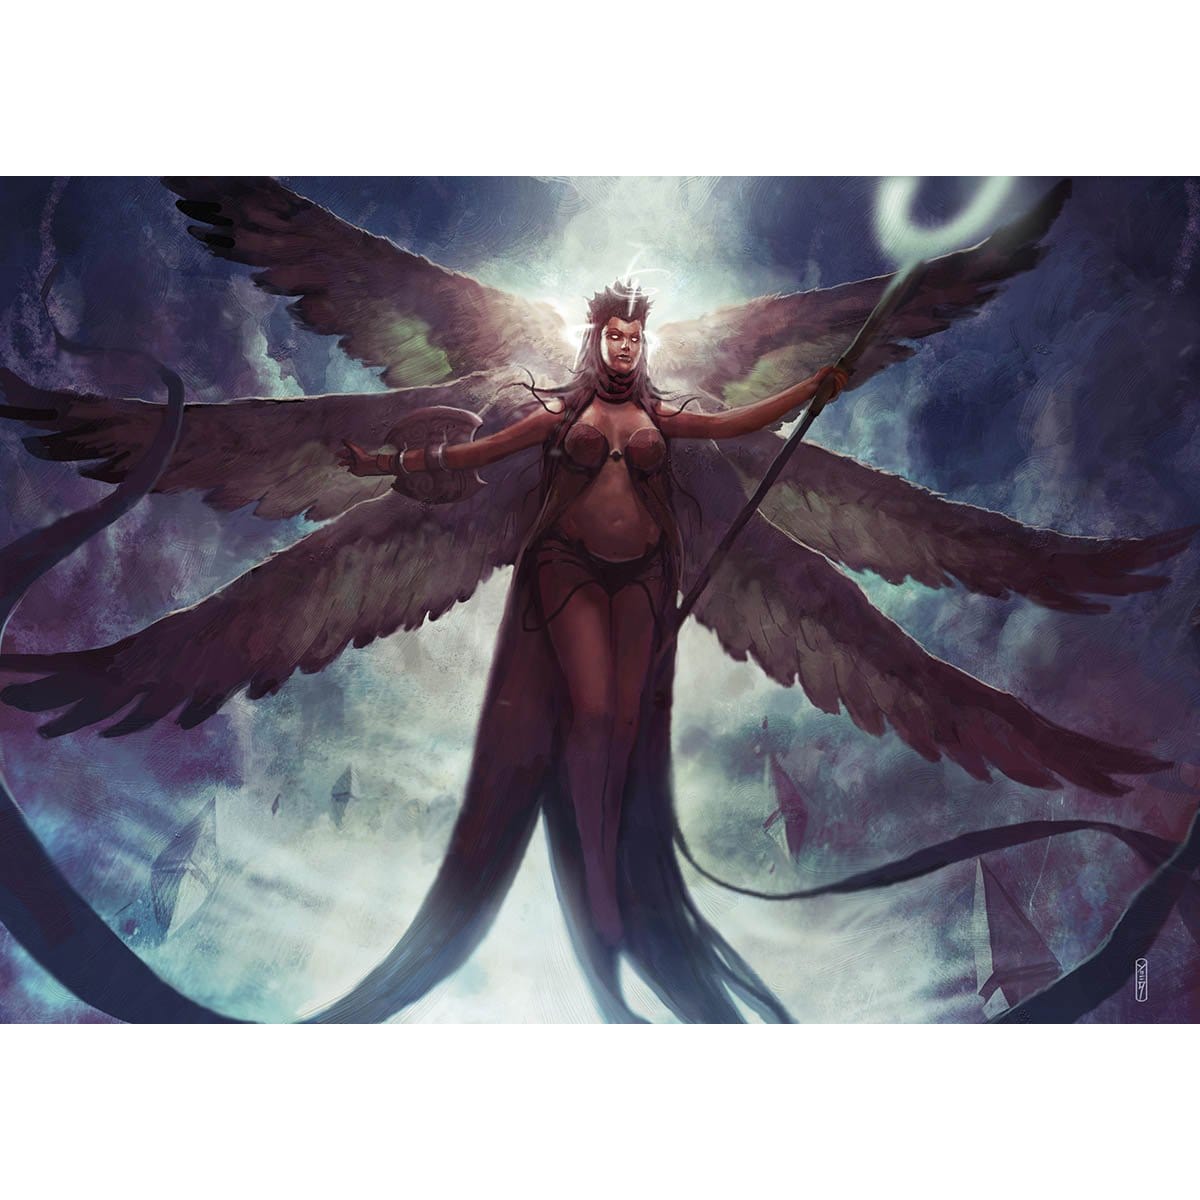 Deathless Angel Print - Print - Original Magic Art - Accessories for Magic the Gathering and other card games